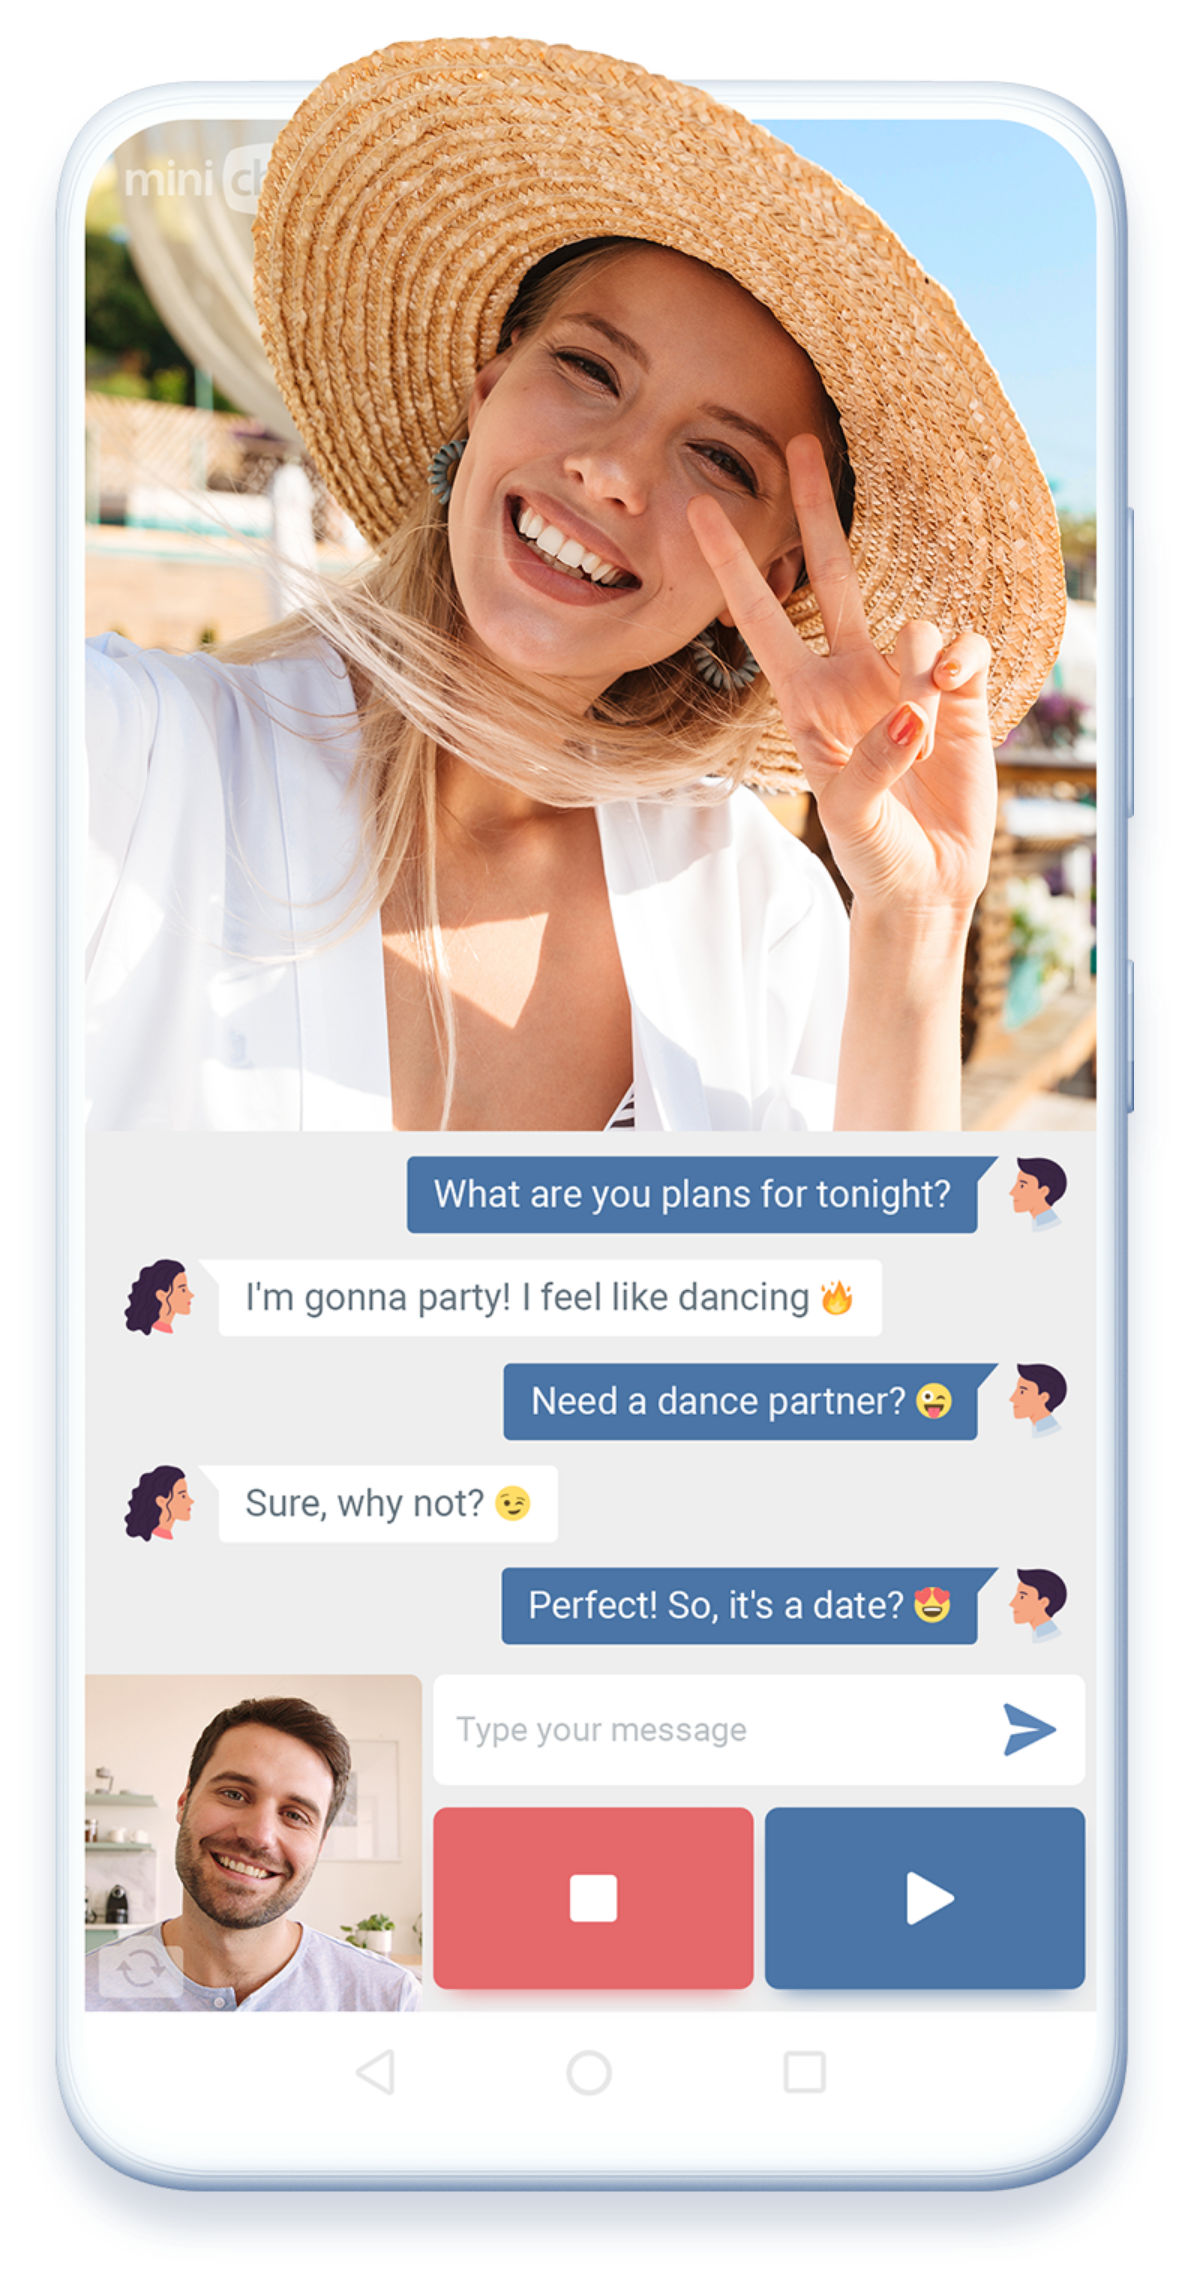 Minichat is a simple and fast video chat to meet people around the world